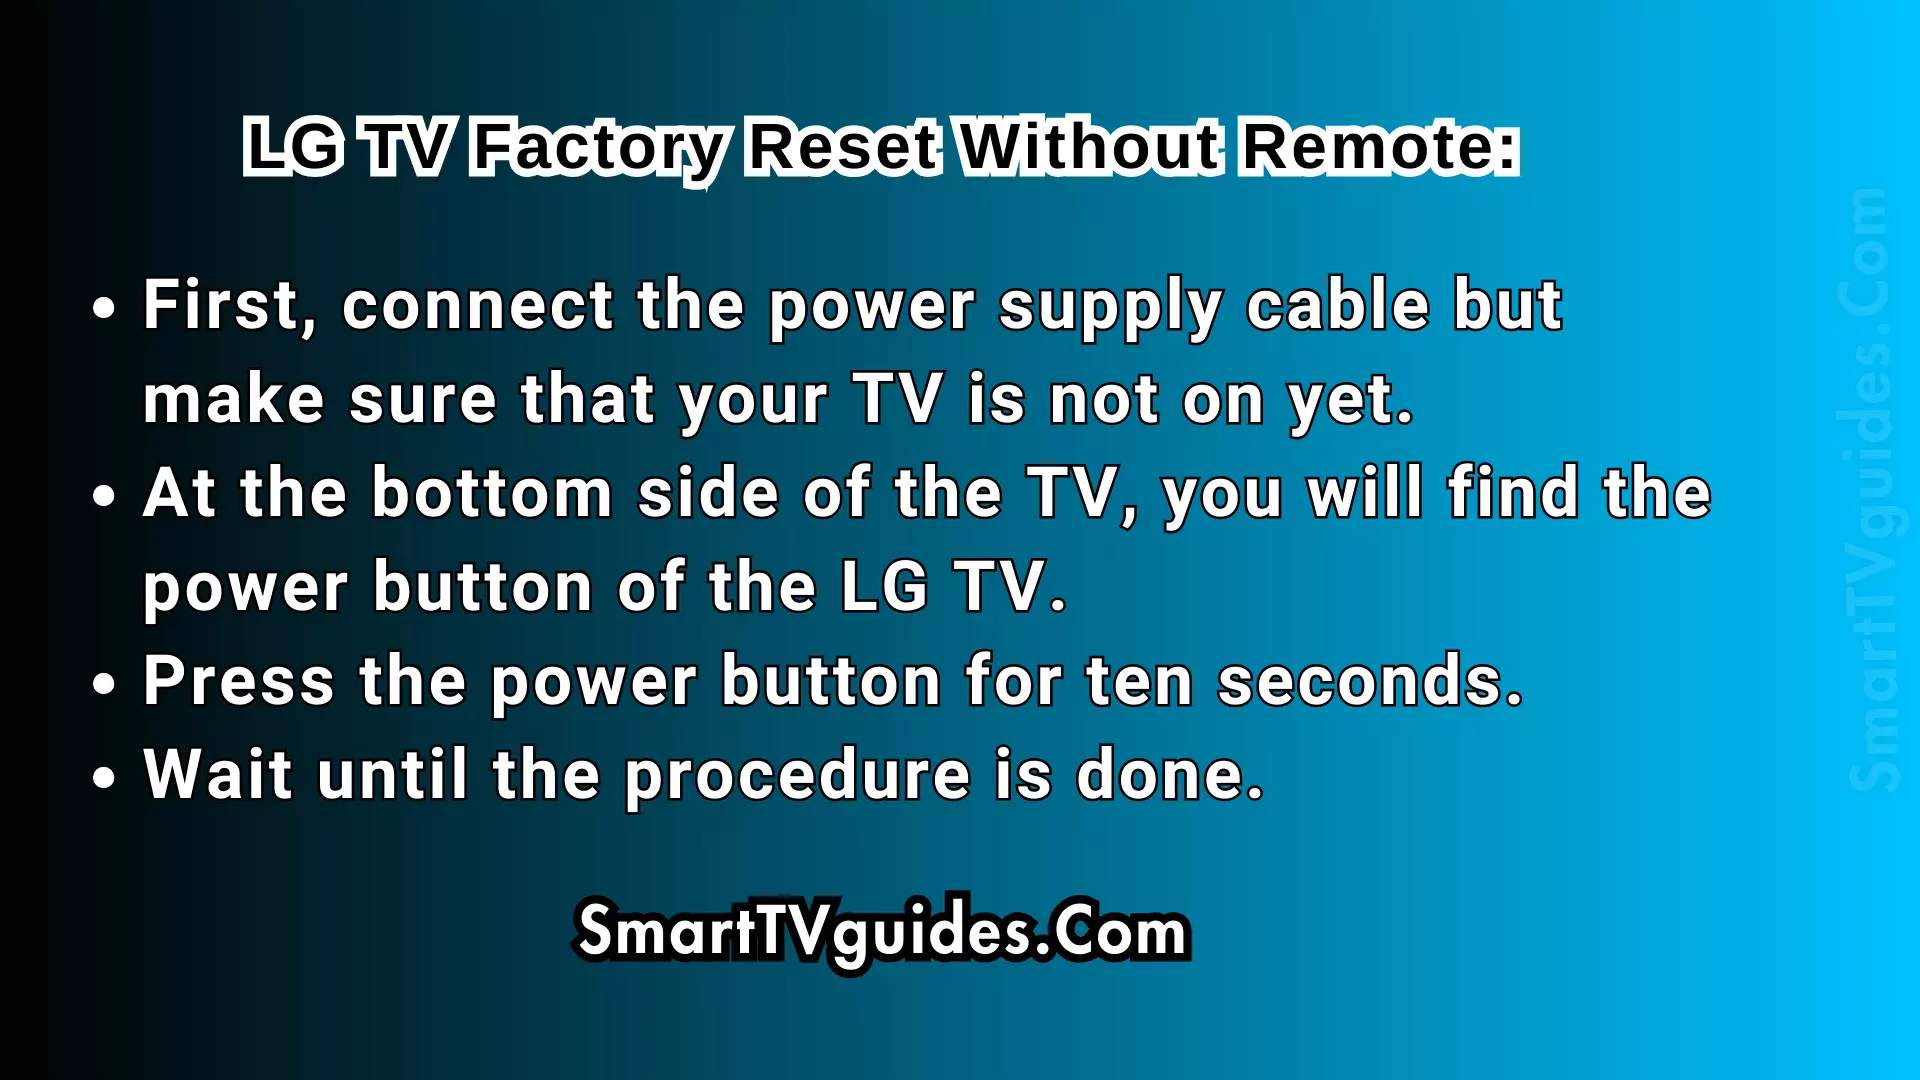 LG TV Factory Reset Without Remote